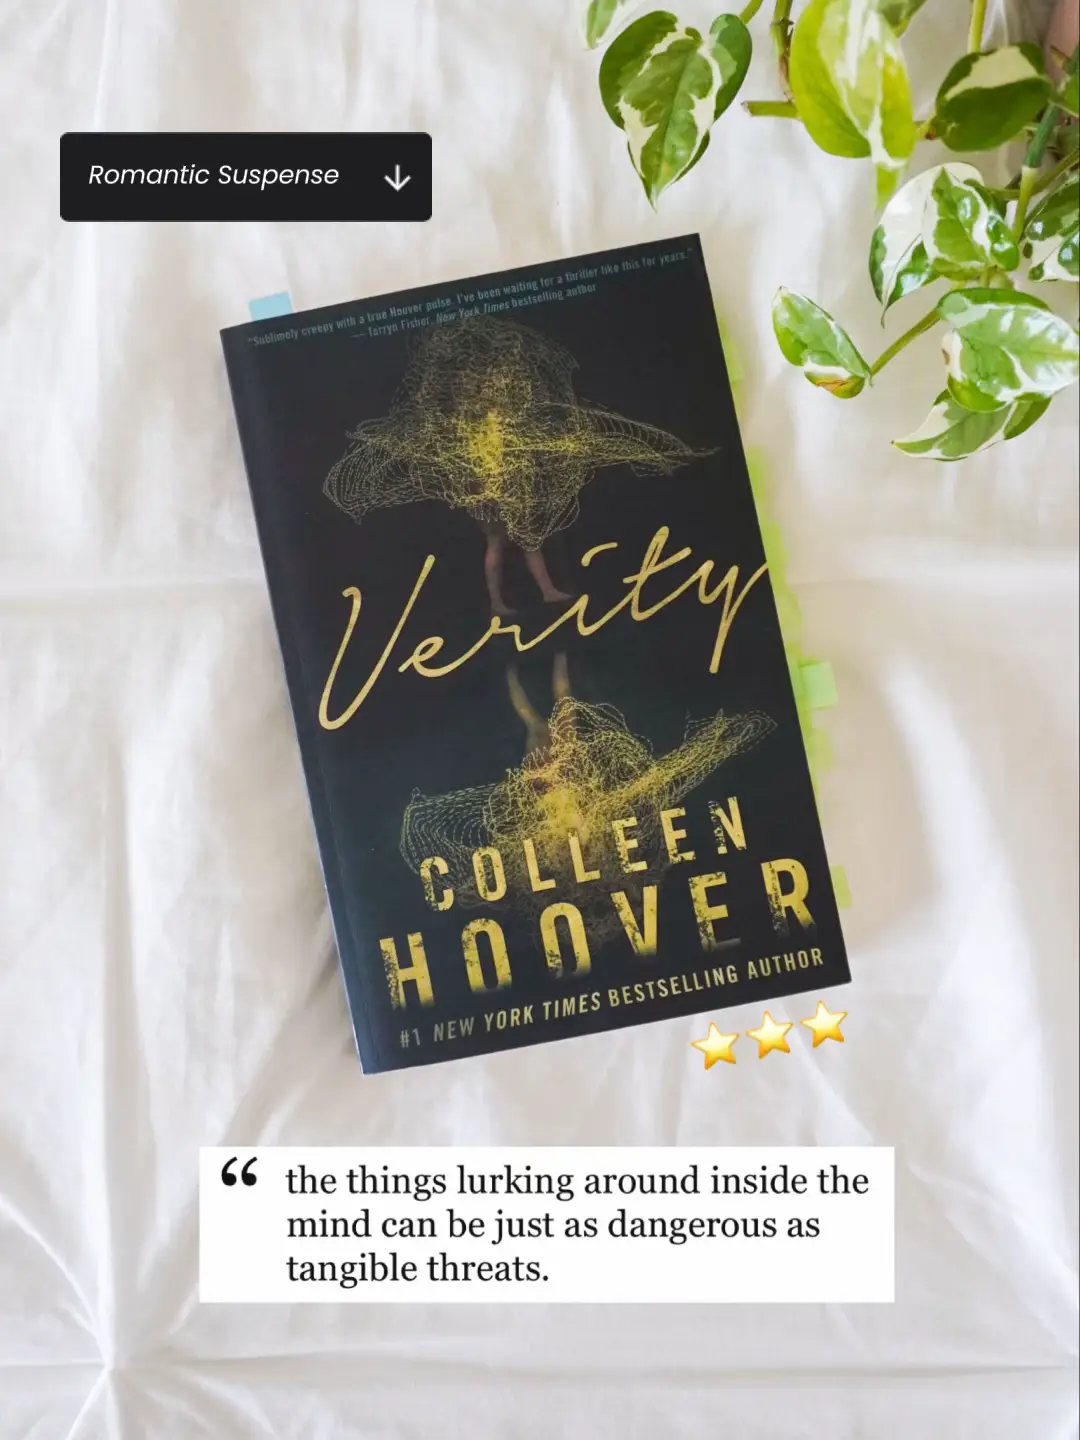 Verity by Colleen Hoover (Author) - Inspire Uplift